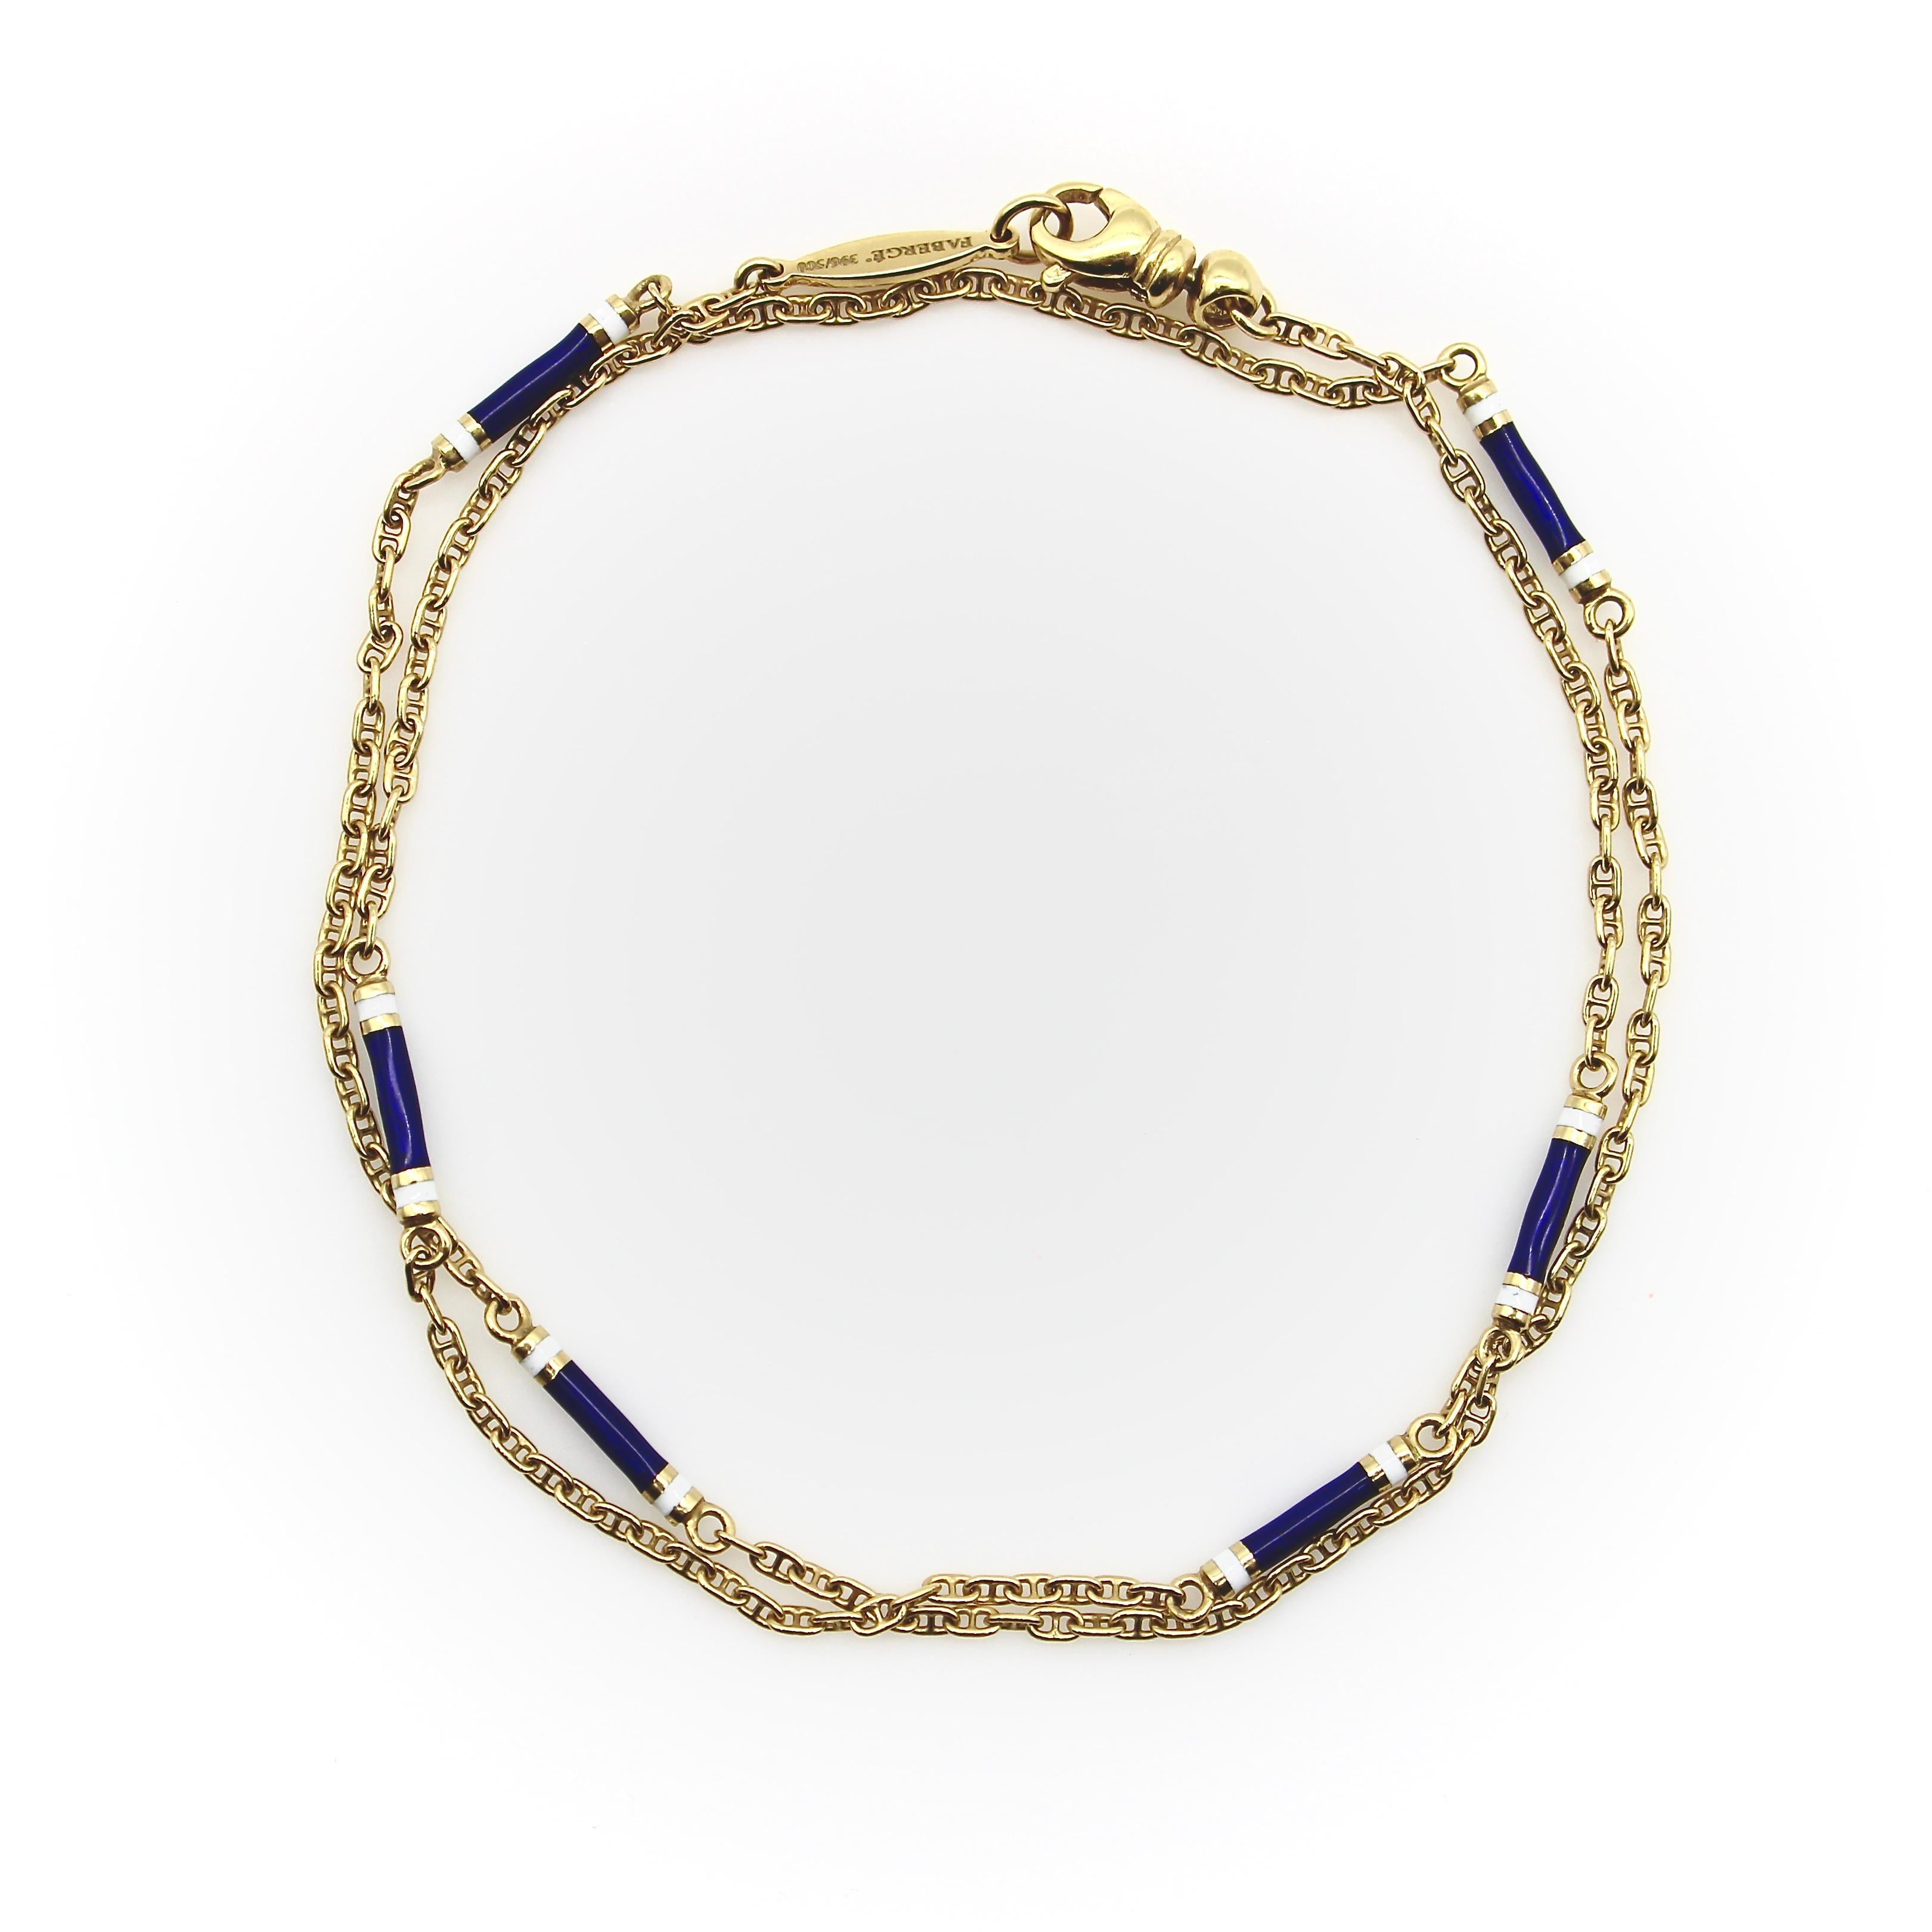 Modern Fabergé 18K Gold Mariners Link Chain with Guilloché Enamel Stations 